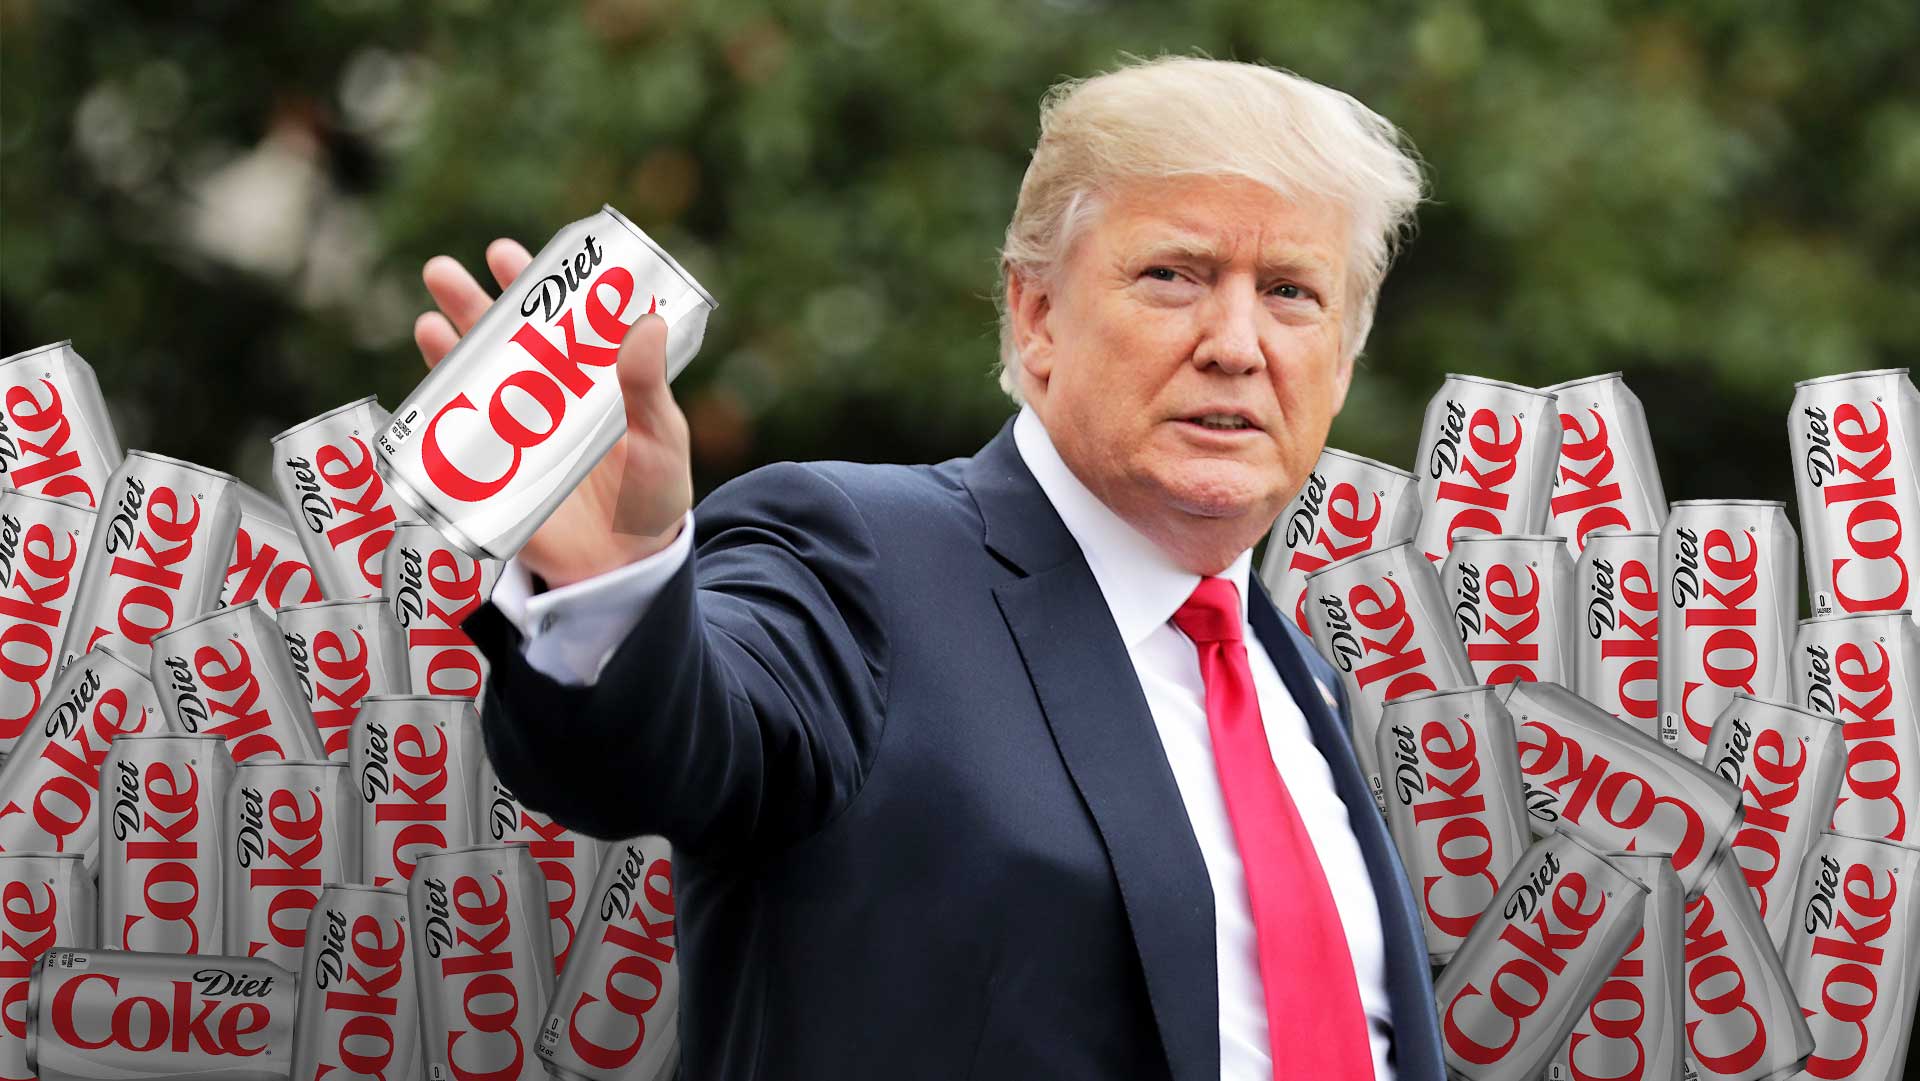 How Donald Trump’s excessive Diet Coke consumption might affect his health